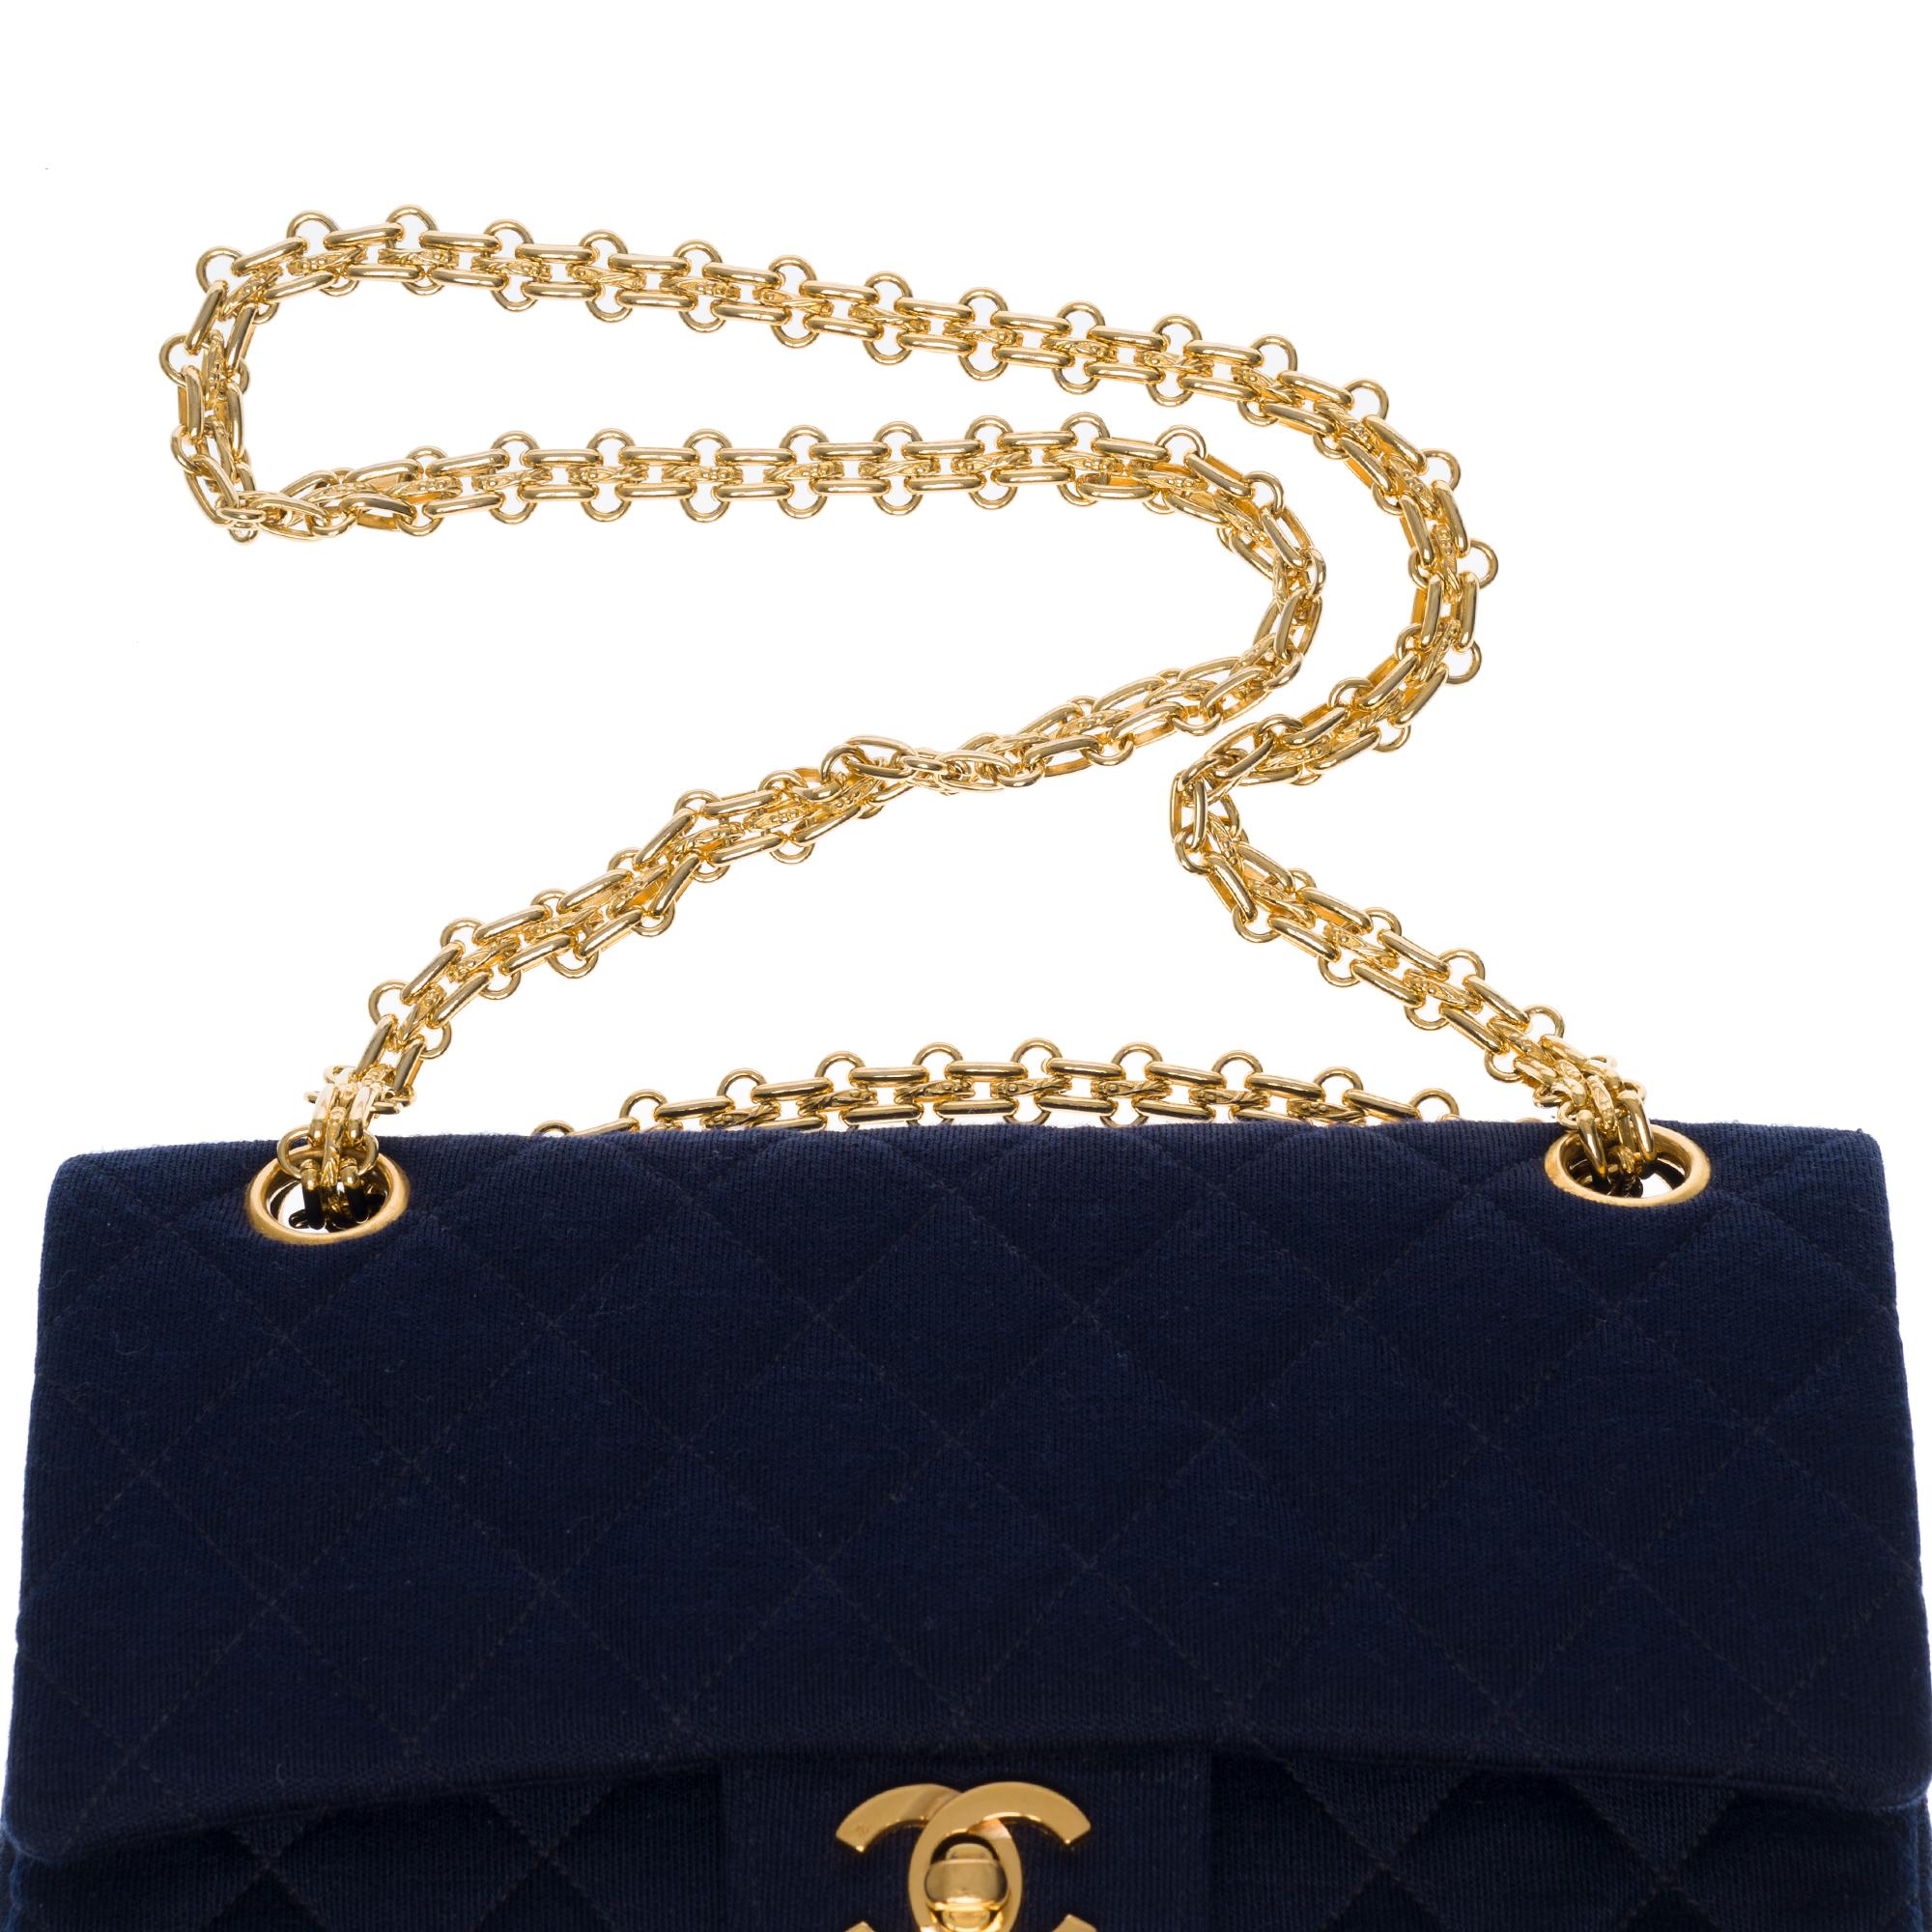 Women's Chanel Timeless shoulder bag in navy blue quilted jersey with gold hardware